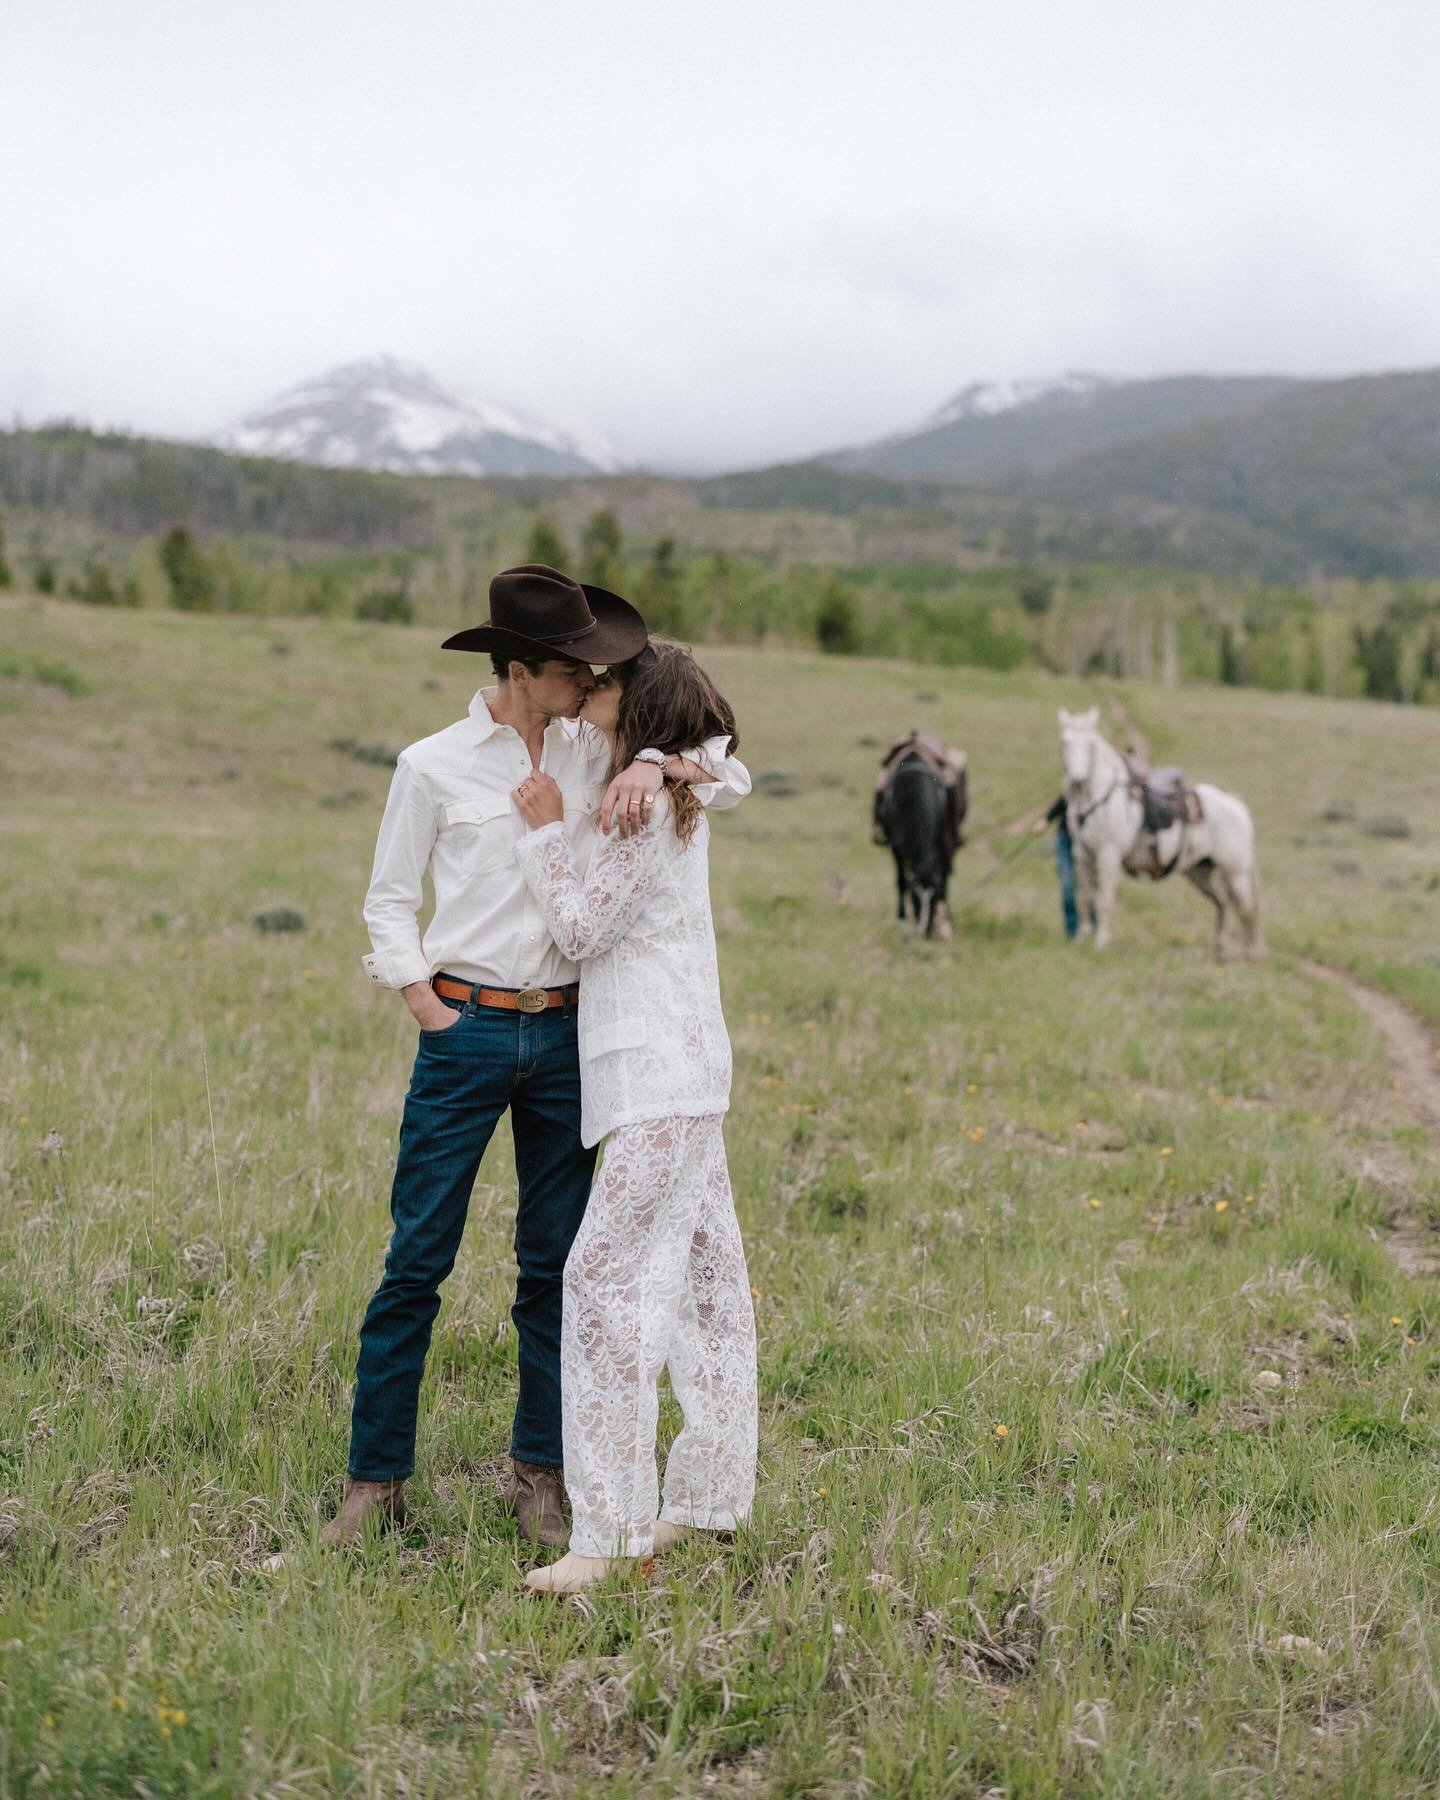 Taylor, Danny, and the sweetest ride through the Colorado countryside.

@taylor_hill 
@table6productions 
@vogueweddings